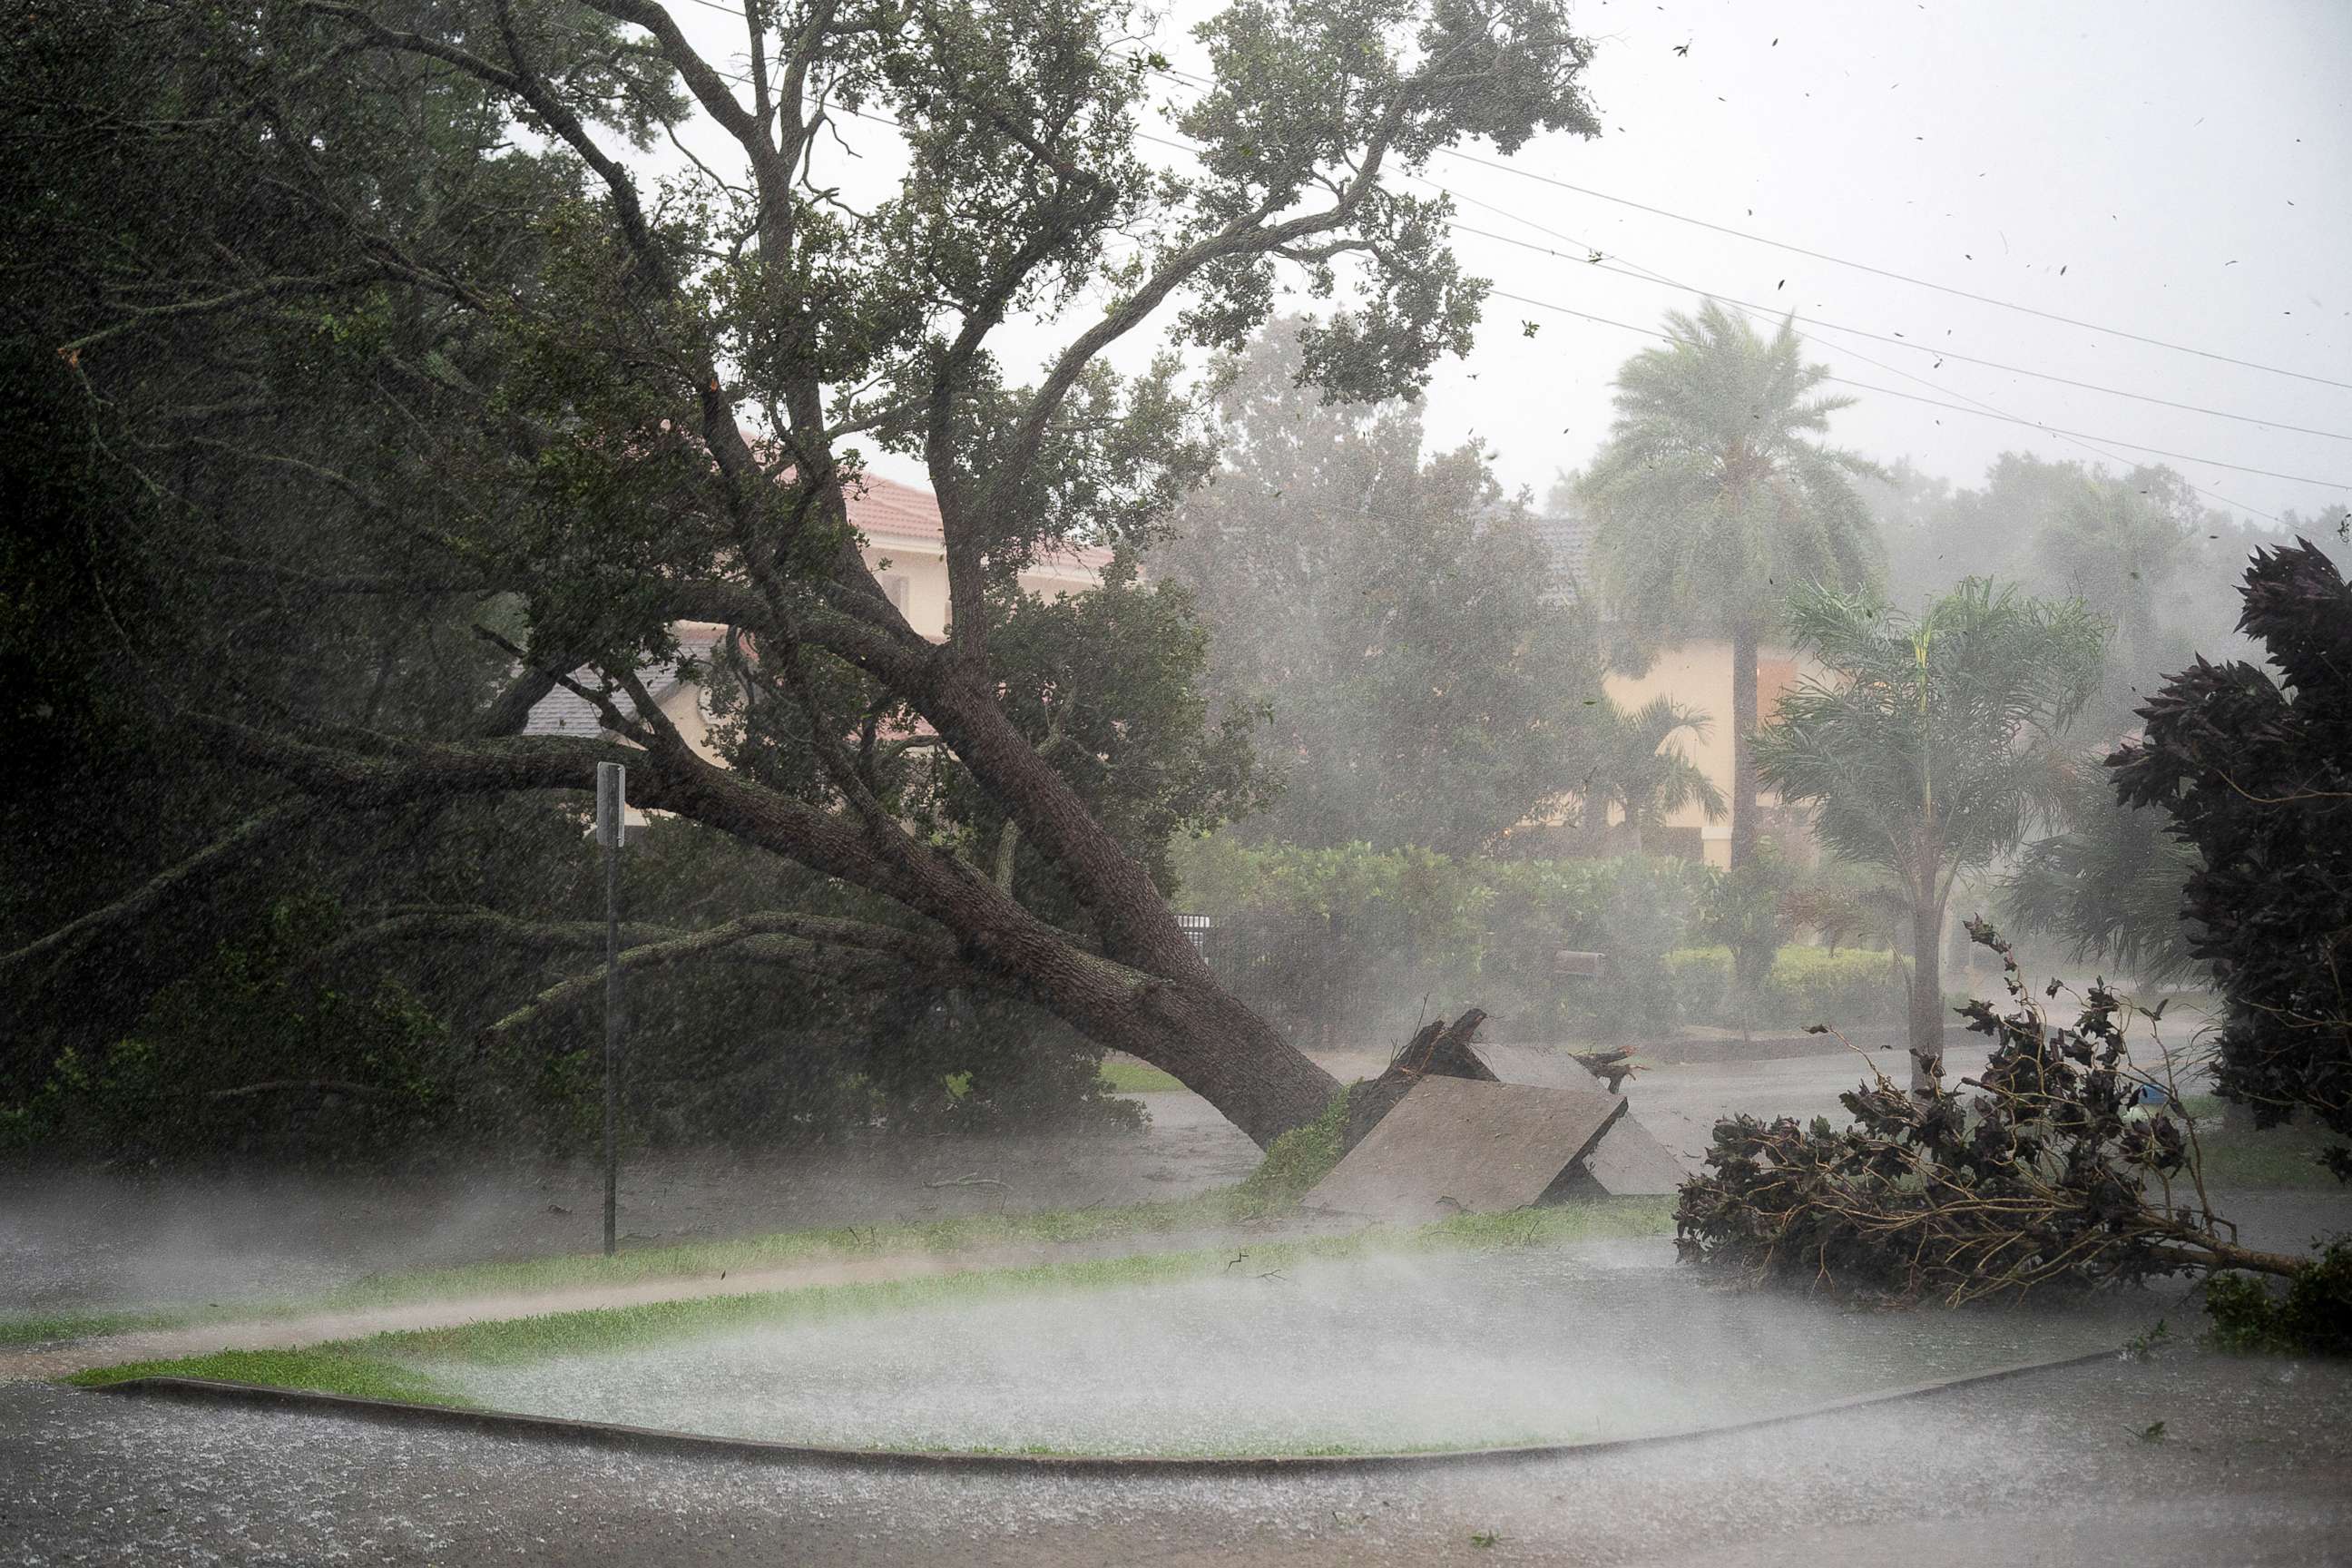 PHOTO: A tree is uprooted by strong winds as Hurricane Ian churns to the south in Sarasota, Fla., Sept. 28, 2022.